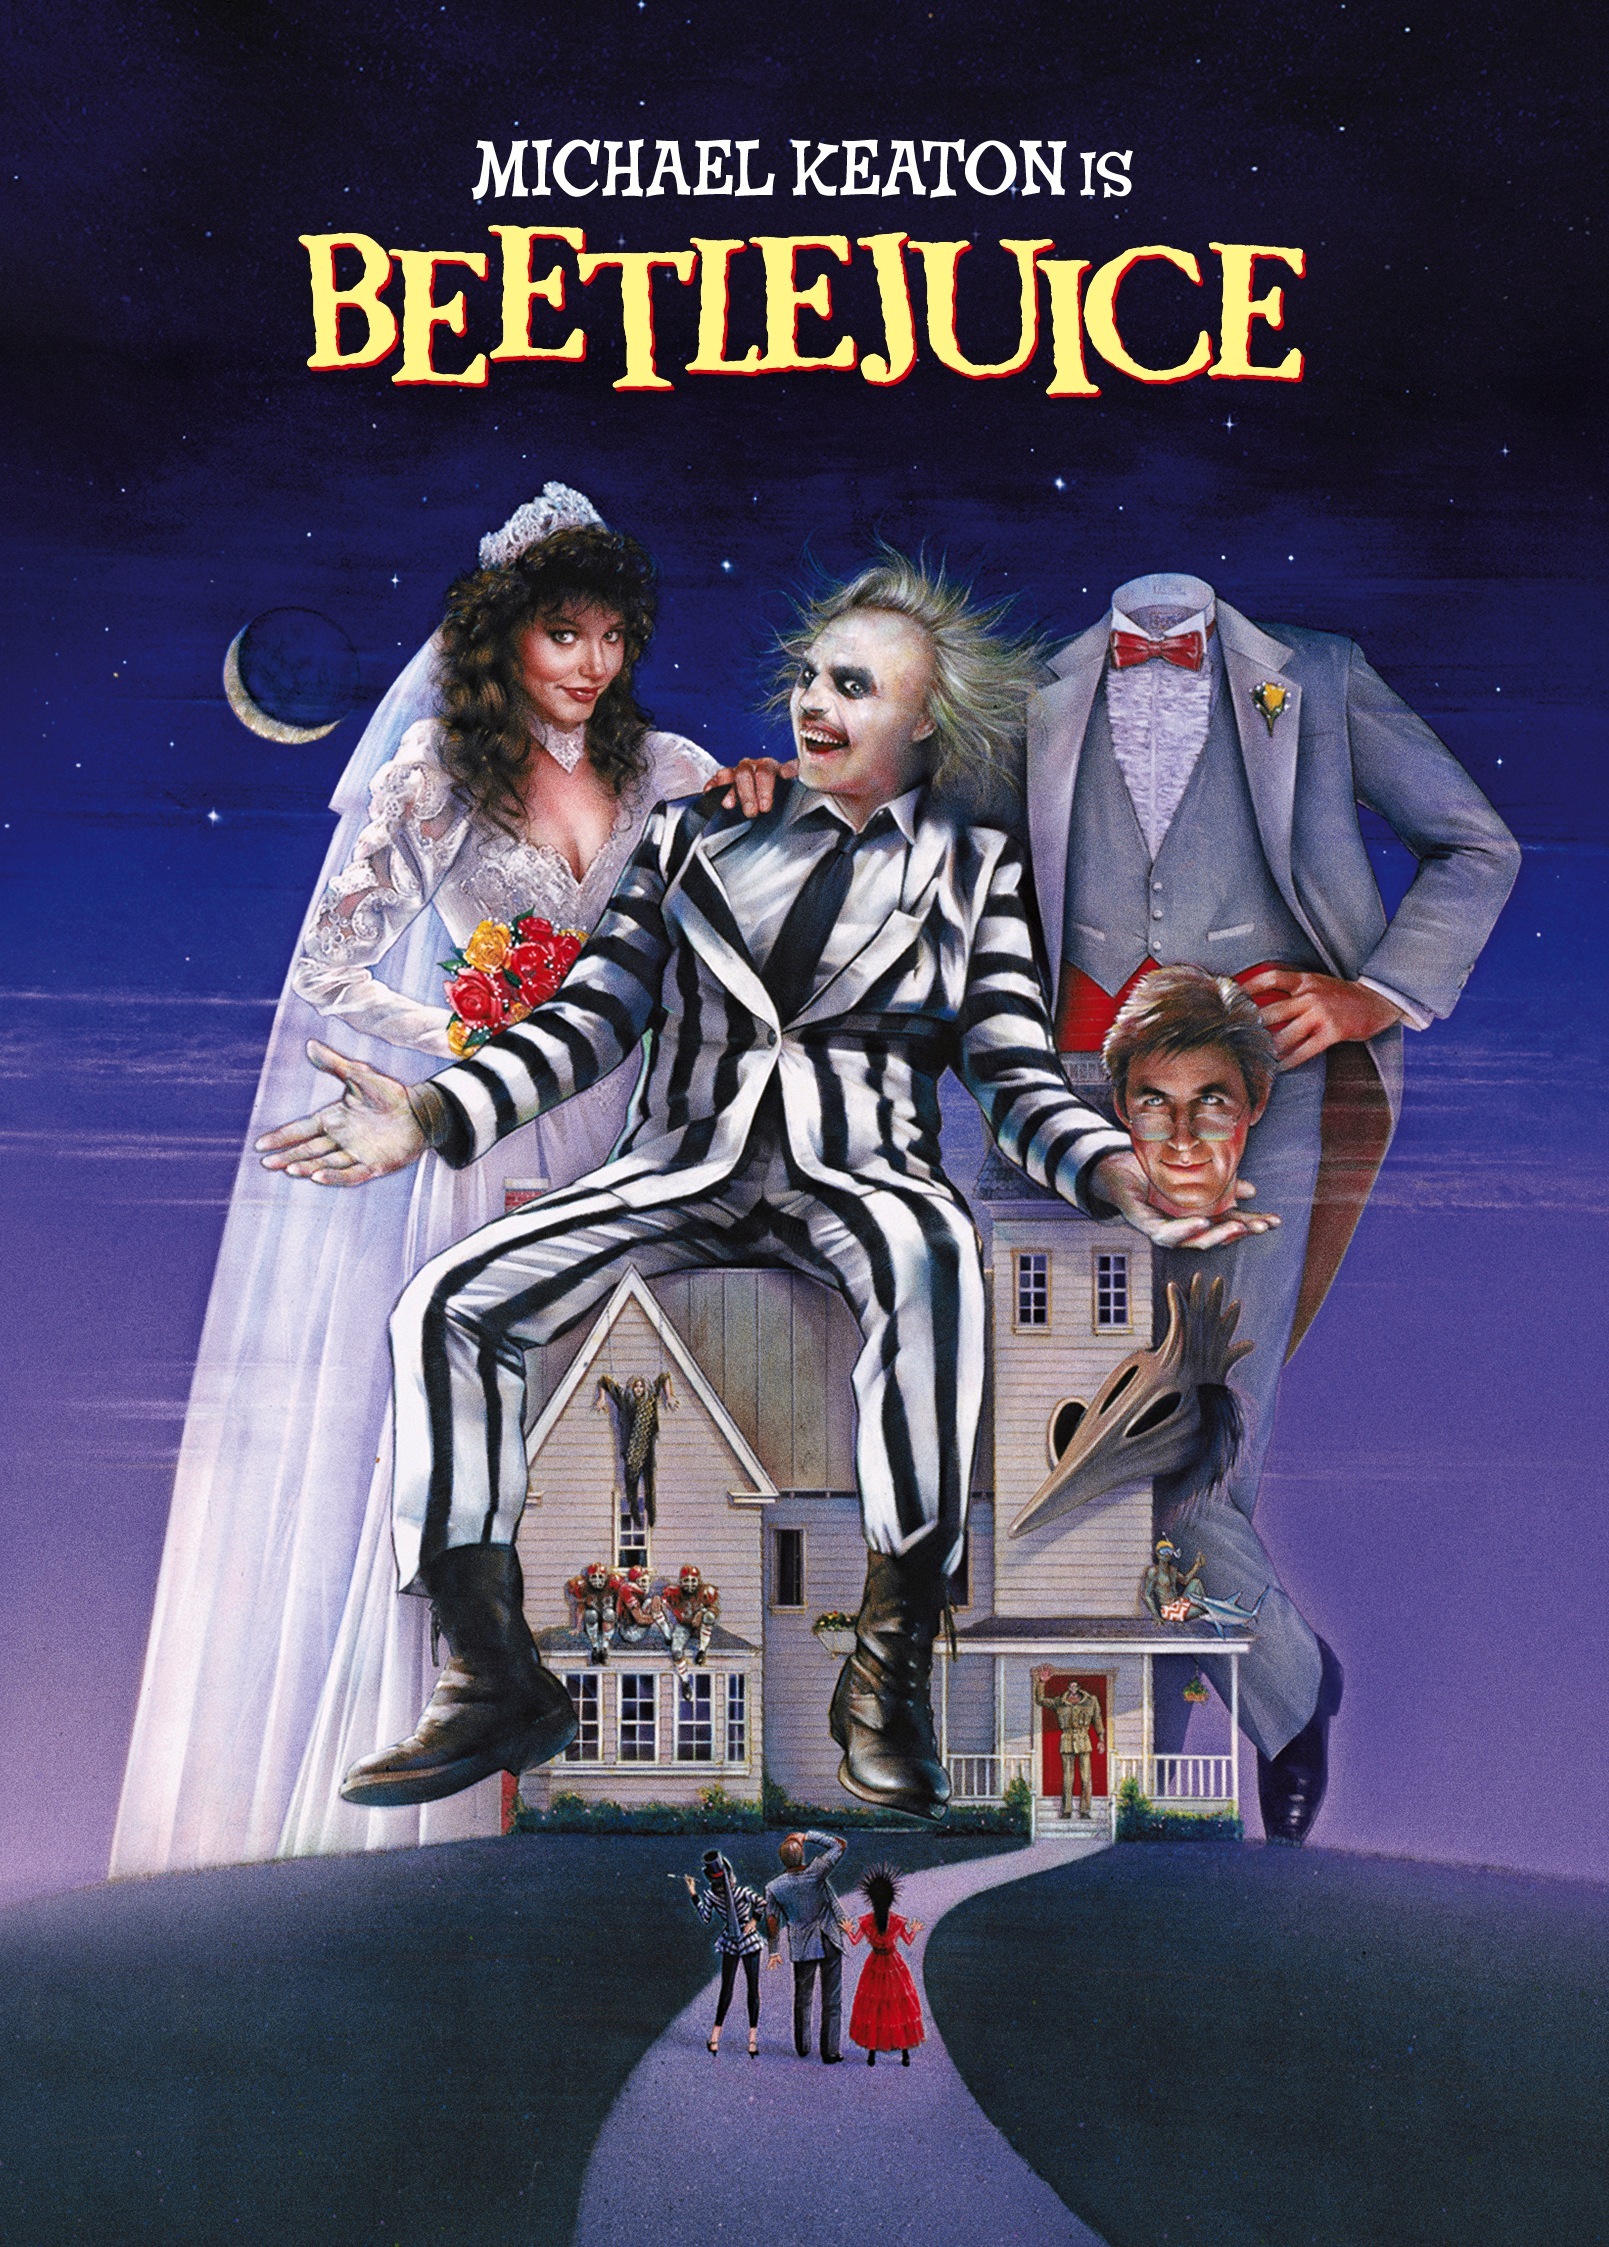 The original Beetlejuice film has become something of a classic